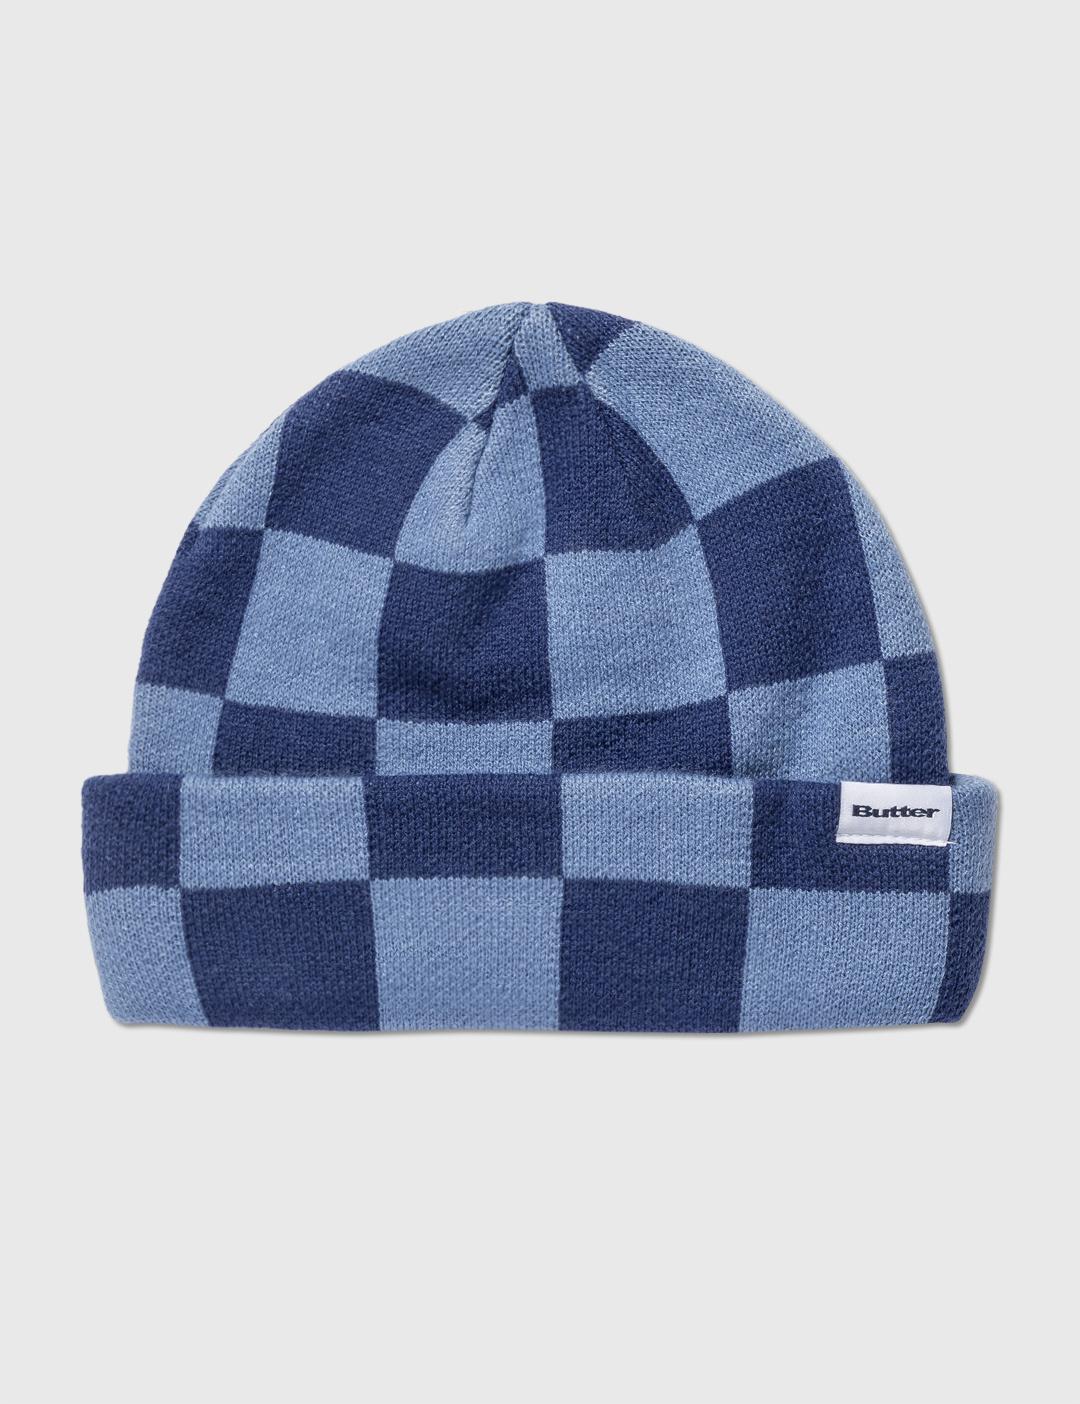 Checkered Beanie by BUTTER GOODS